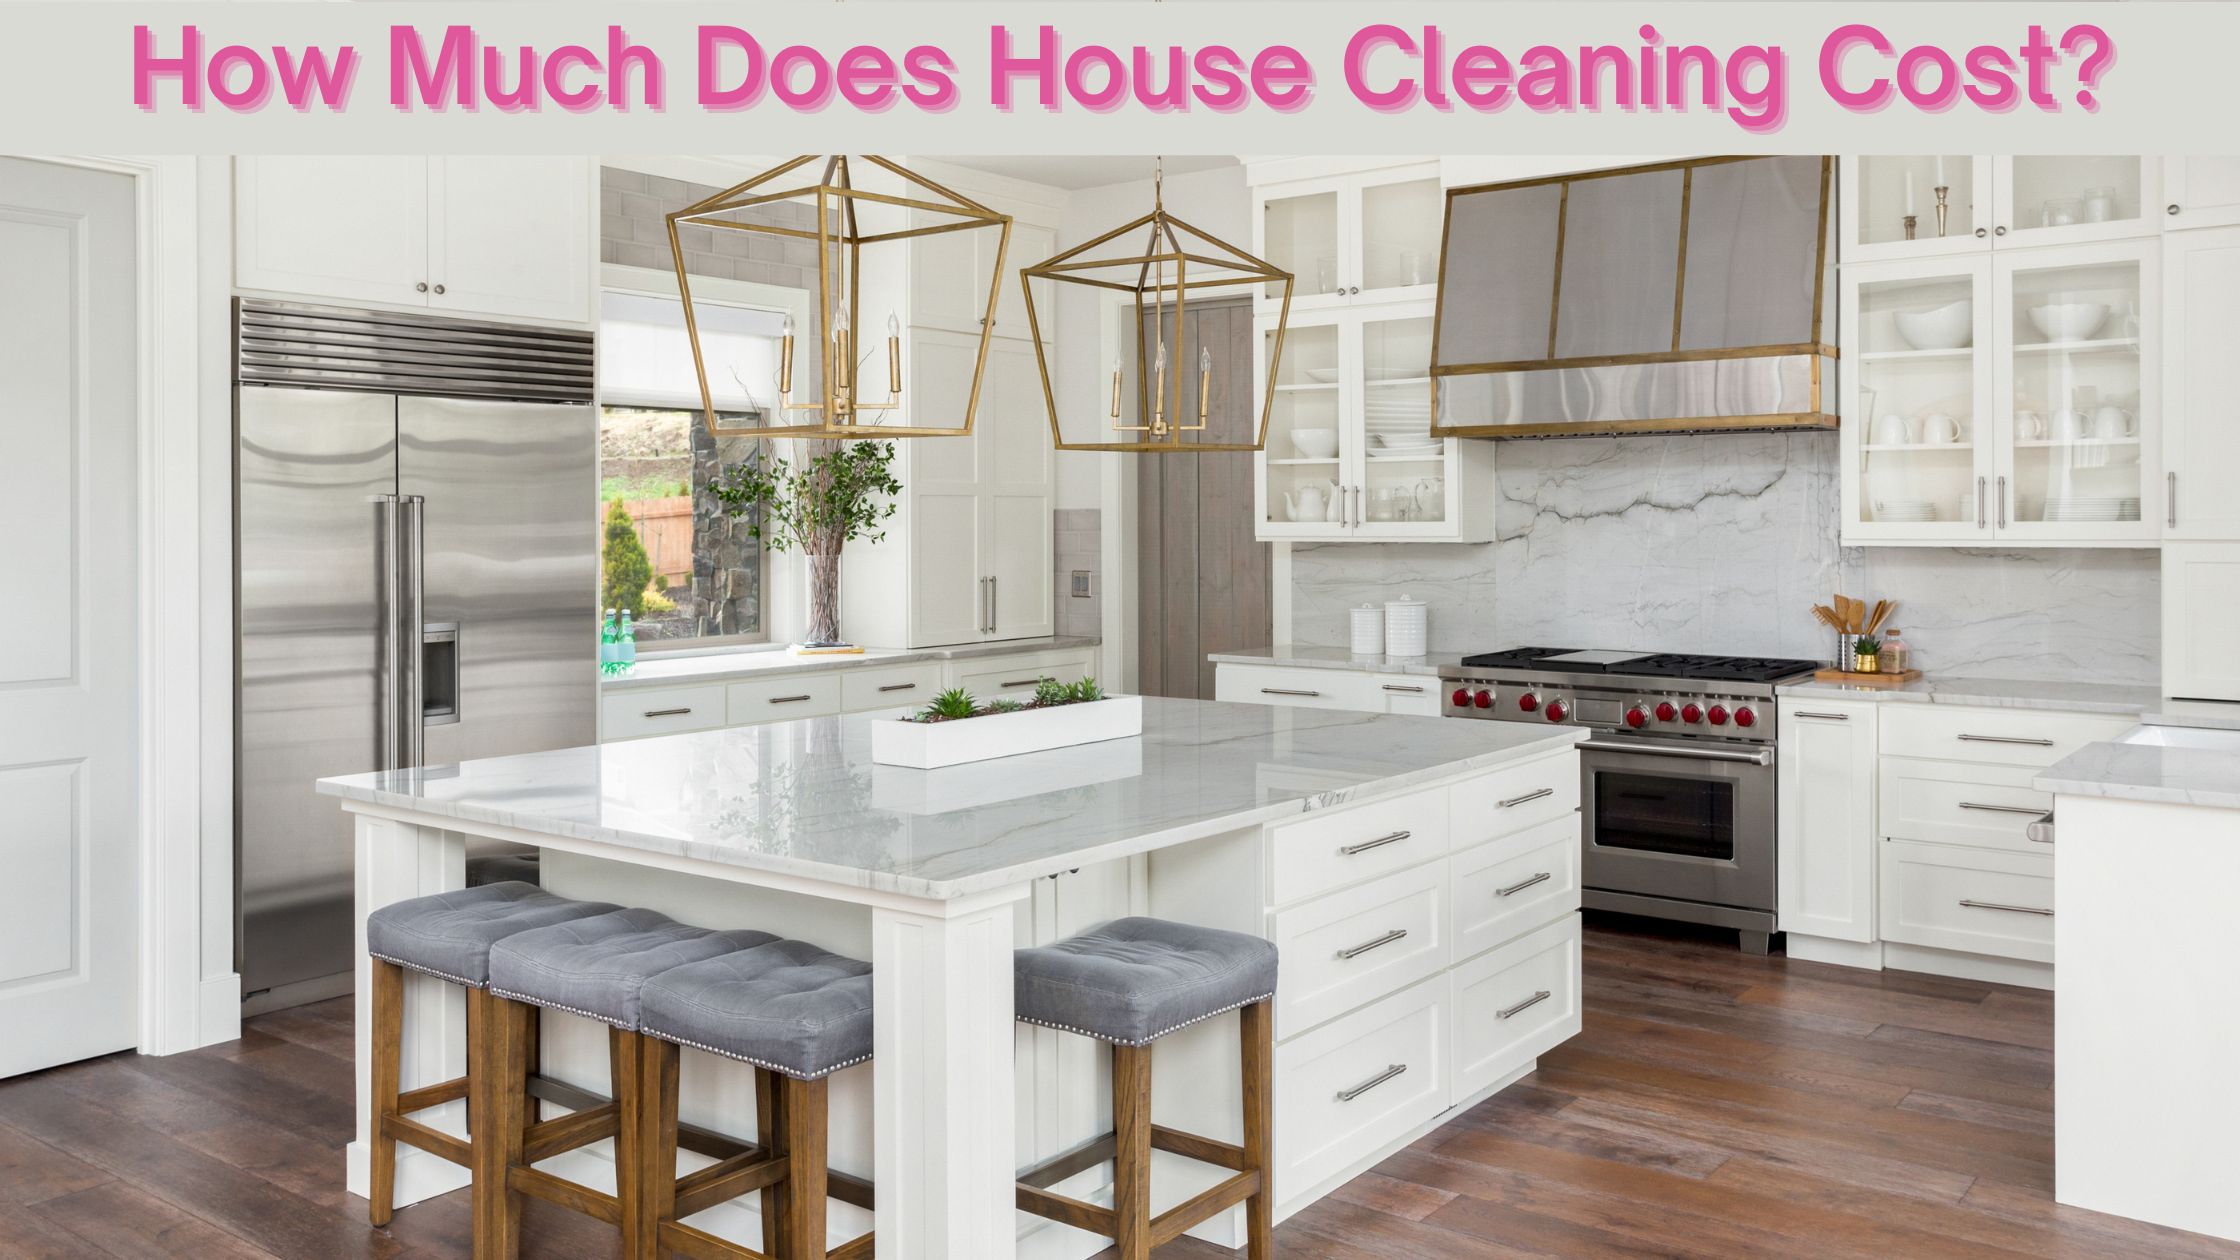 Price of House Cleaning